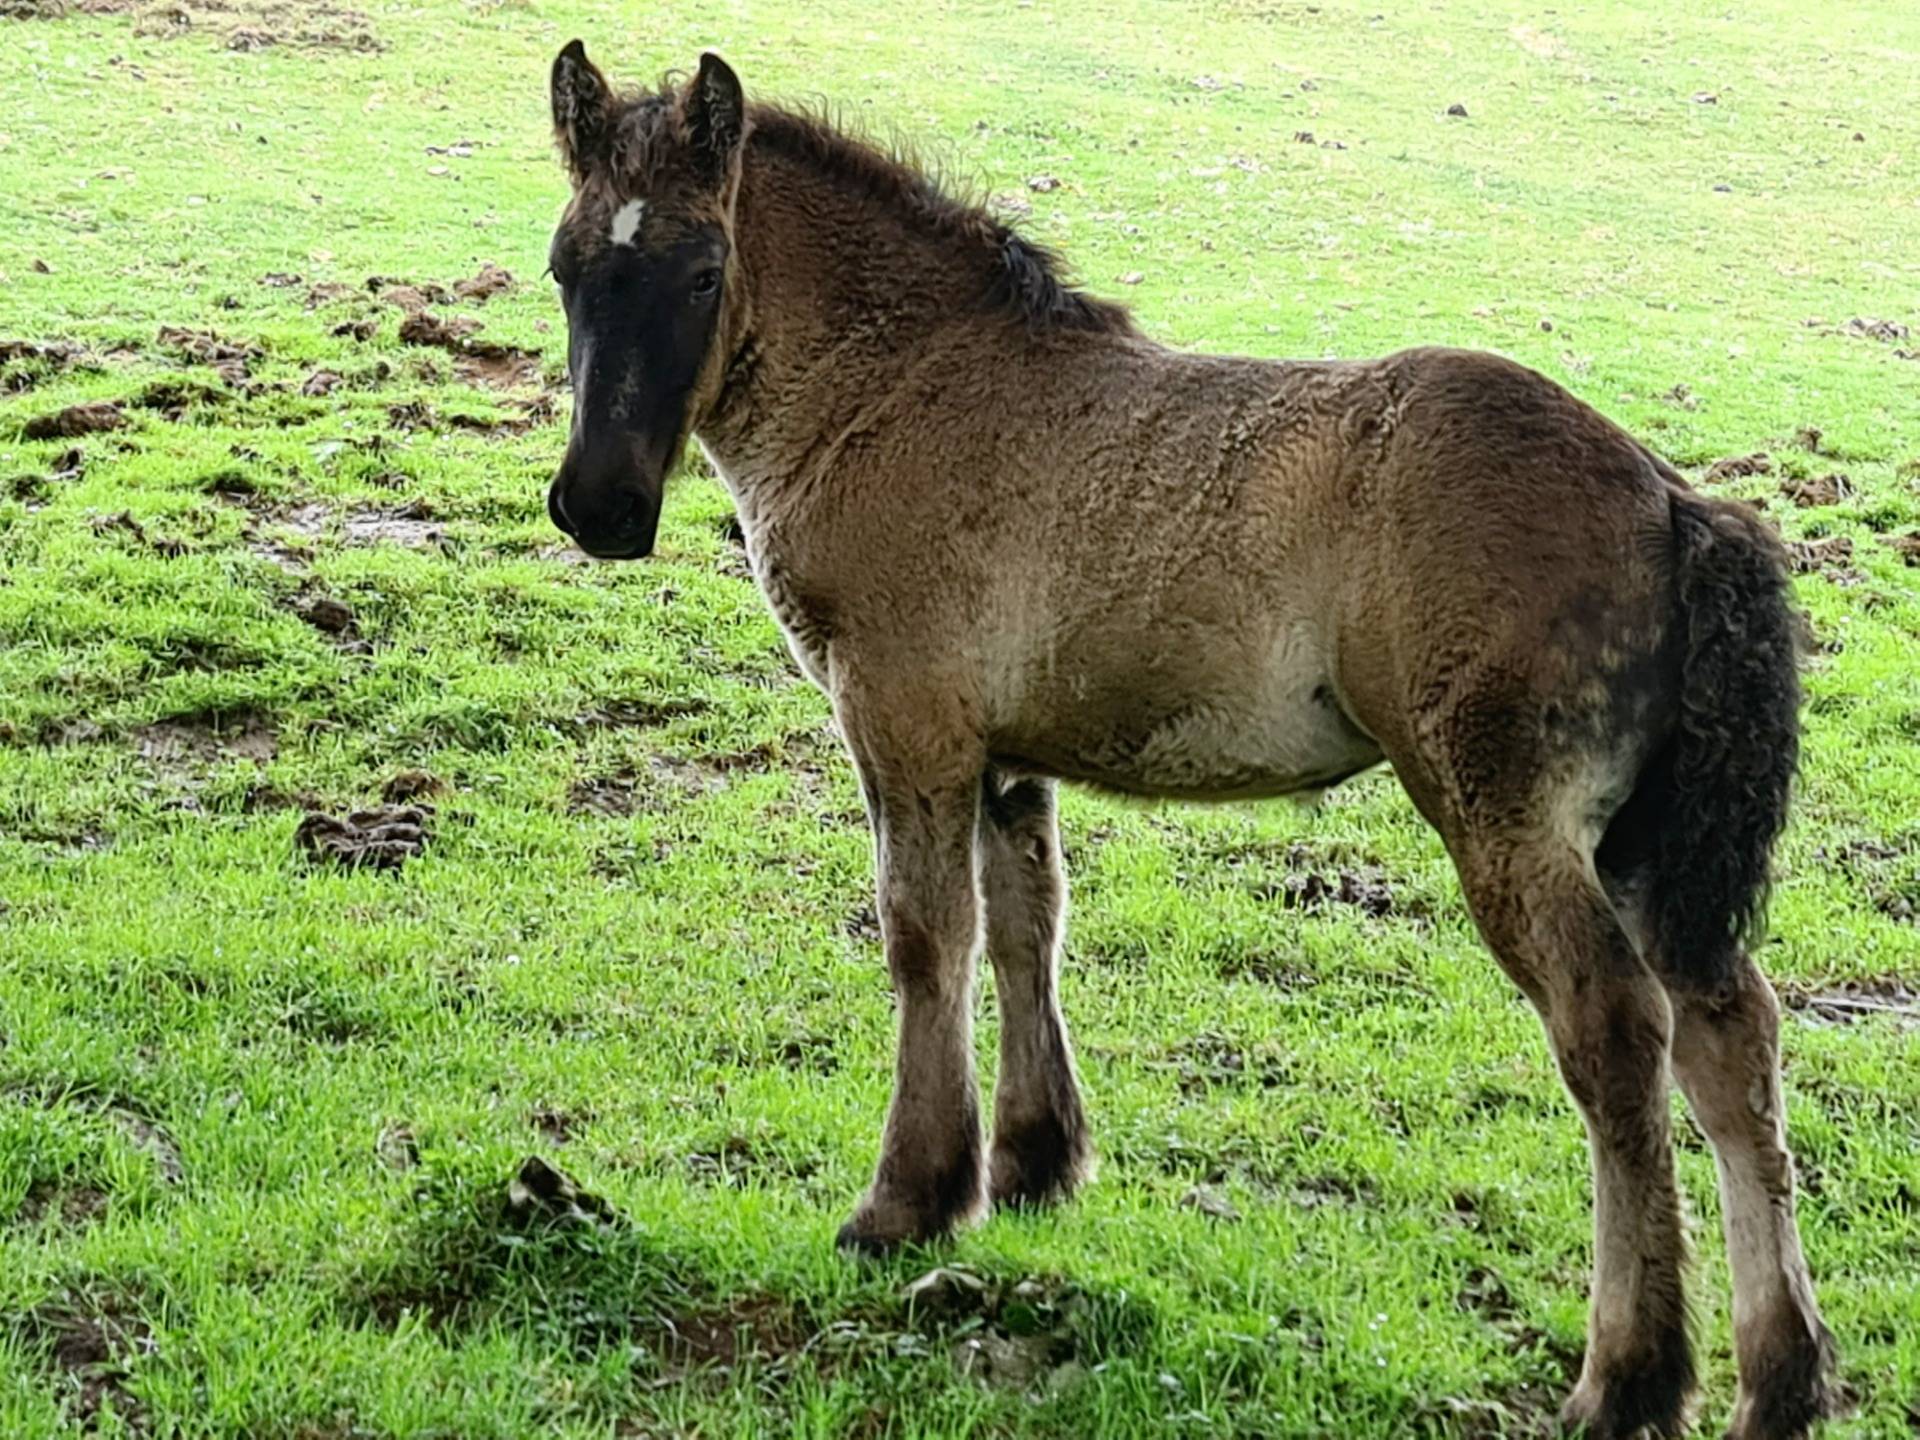 A beautiful foal that seems to be saying to me: ”See you soon in Nature again, mate”.